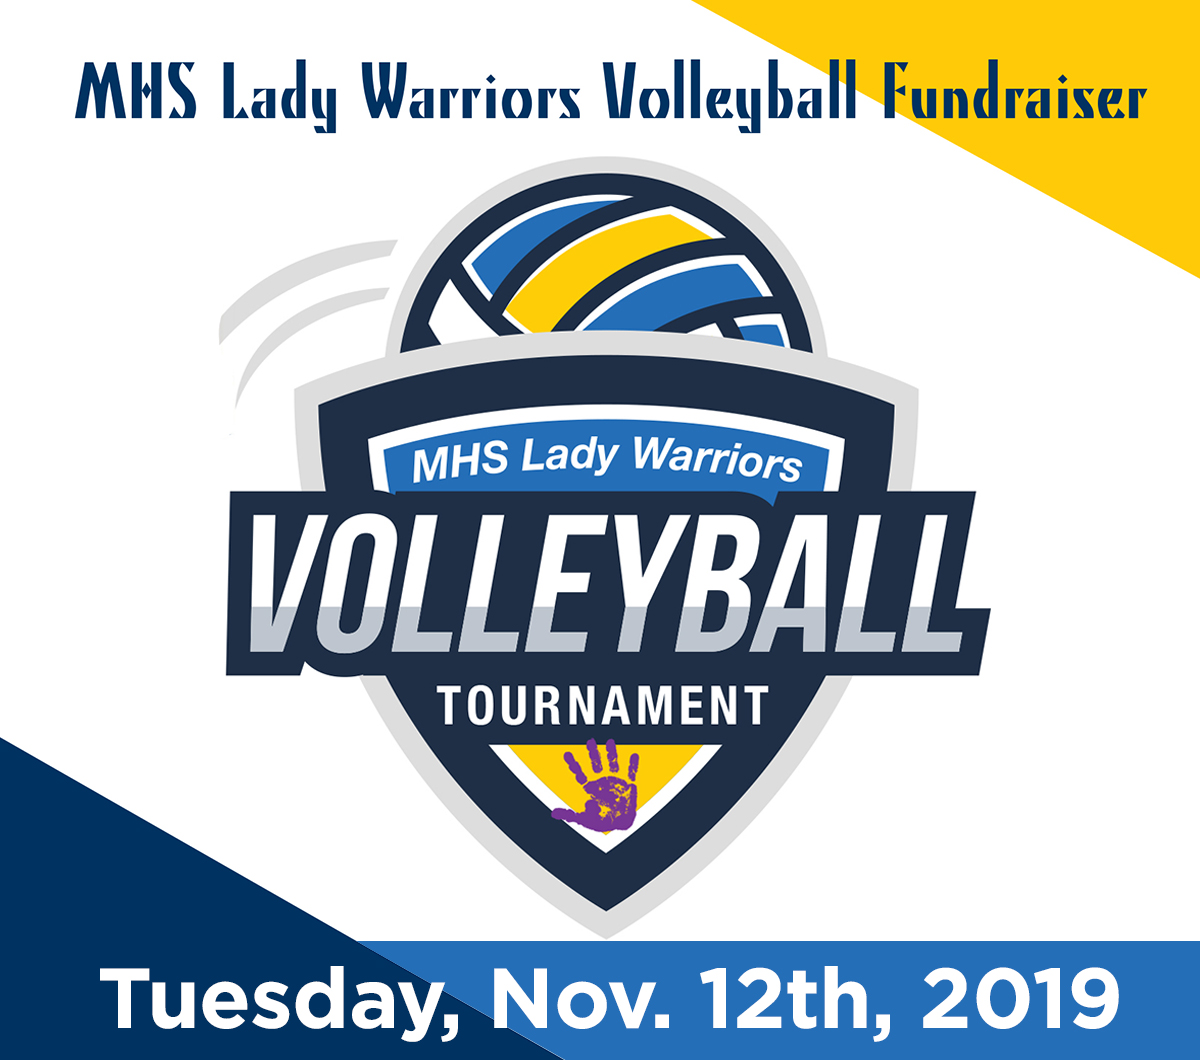 MHS Lady Warriors Volleyball Fundraiser